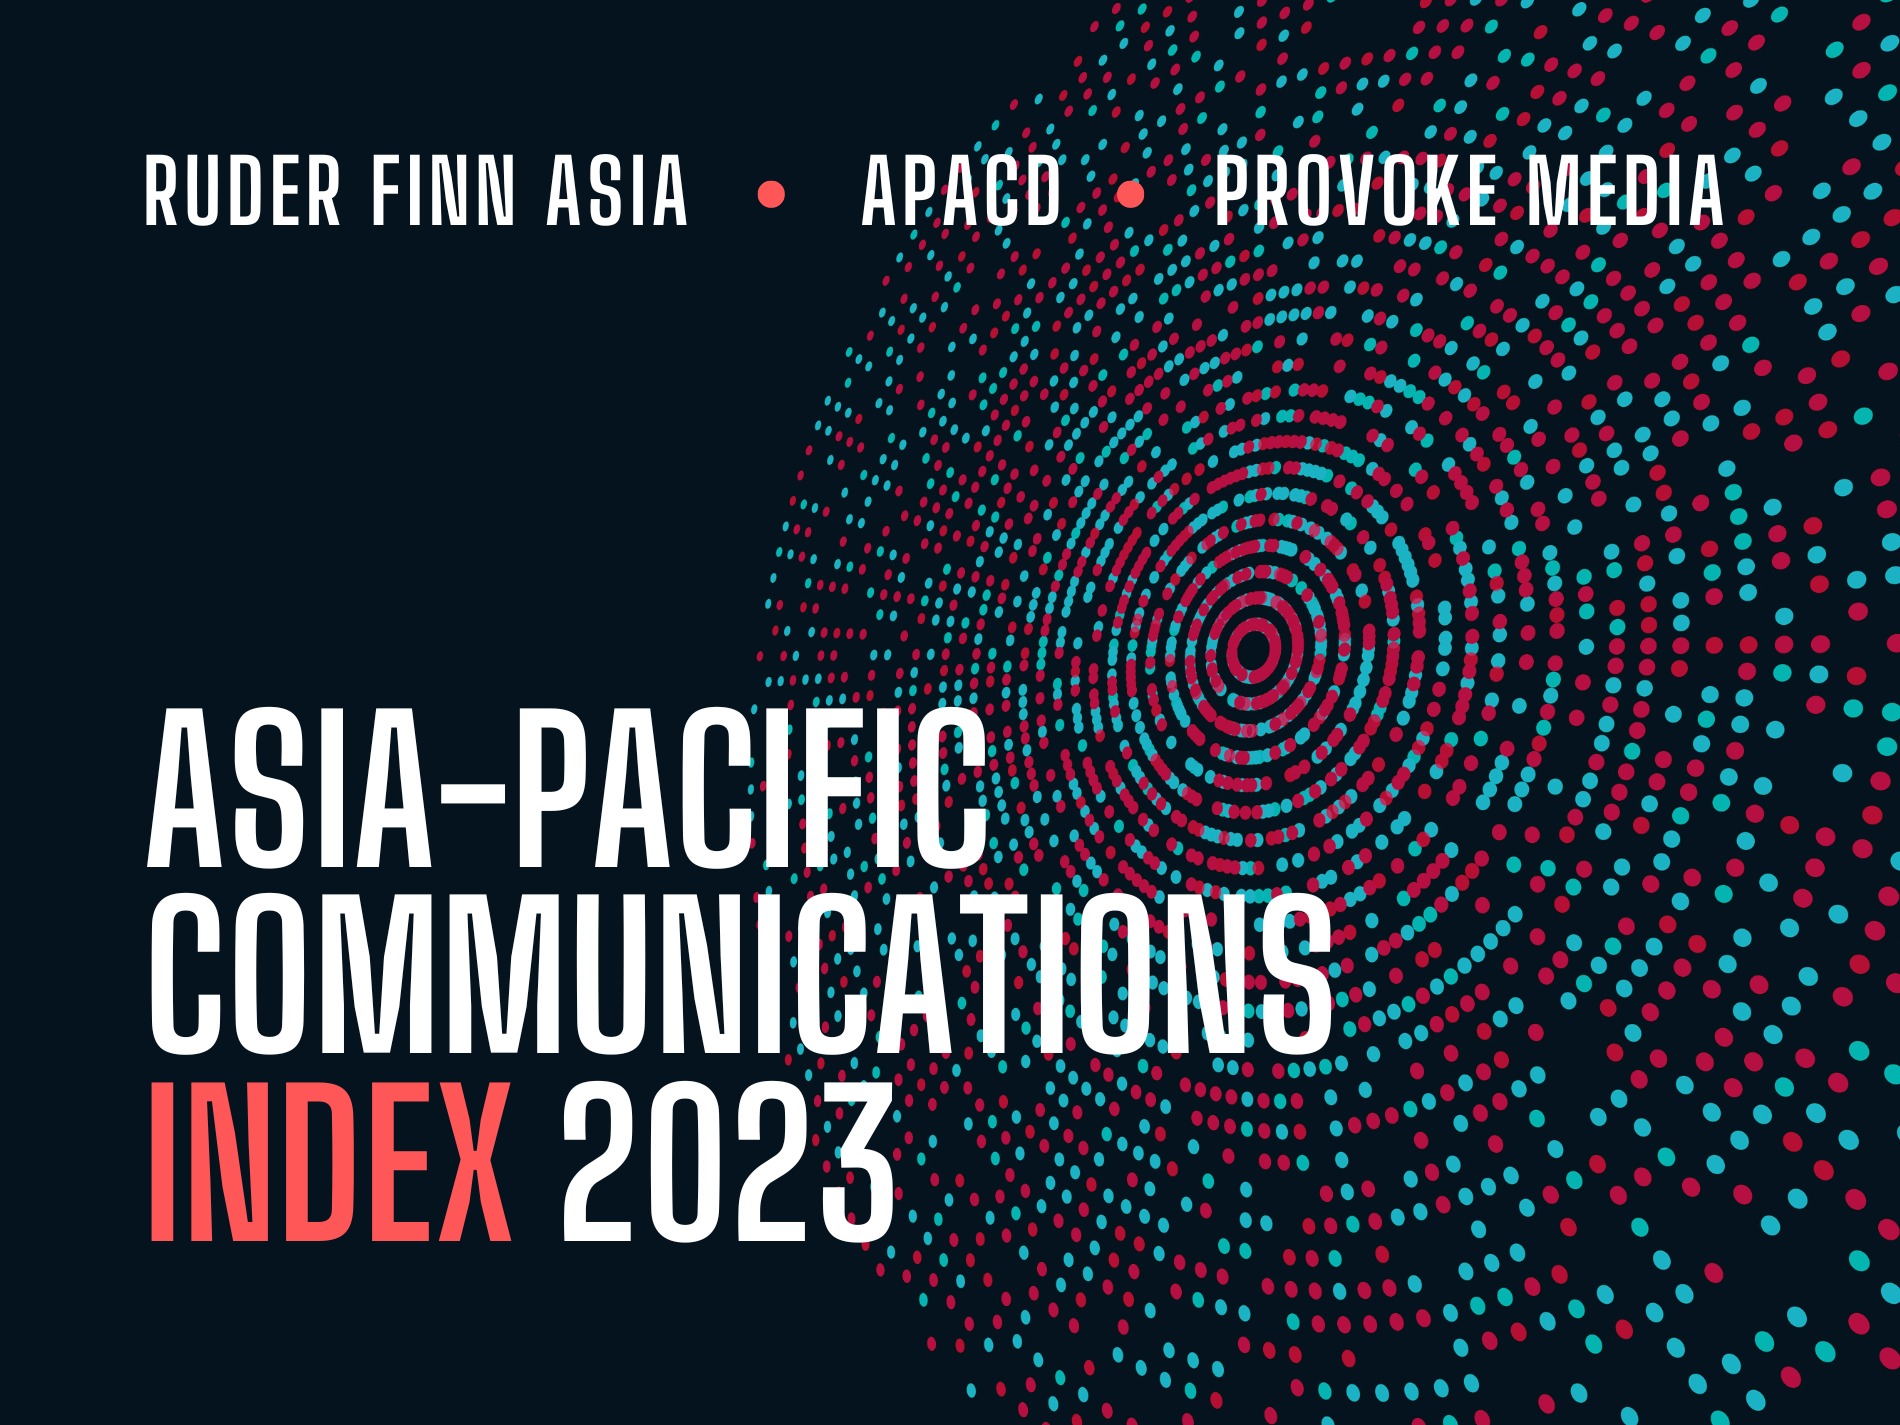 2023 CommsIndex: ESG Emerges As Key Driver For Empowered Asia-Pacific Comms Leaders